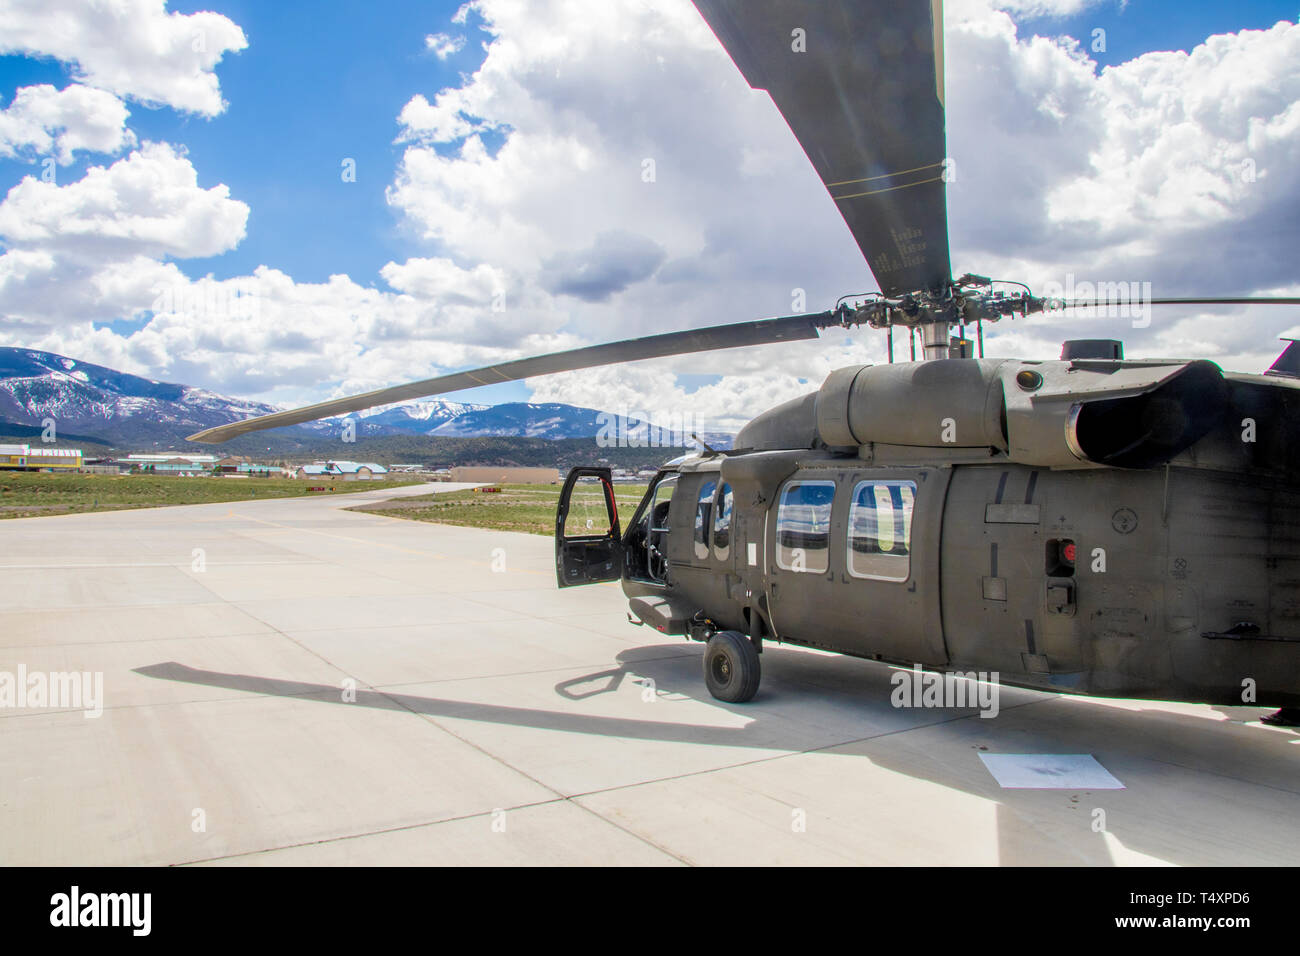 A UH-60 Blackhawk awaits refueling at the Eagle County Regional Airport, Gypsum, Colo., April 17 2019. Eagle County Regional Airport is home to the High Altitude Army National Guard Aviation Training Site, operated by the Colorado Army National Guard, HAATS is a  premiere training site for all branches of military rotary wing aviators to learn about power management. (U.S. Army National Guard photo by Spc. Michael Hunnisett) Stock Photo